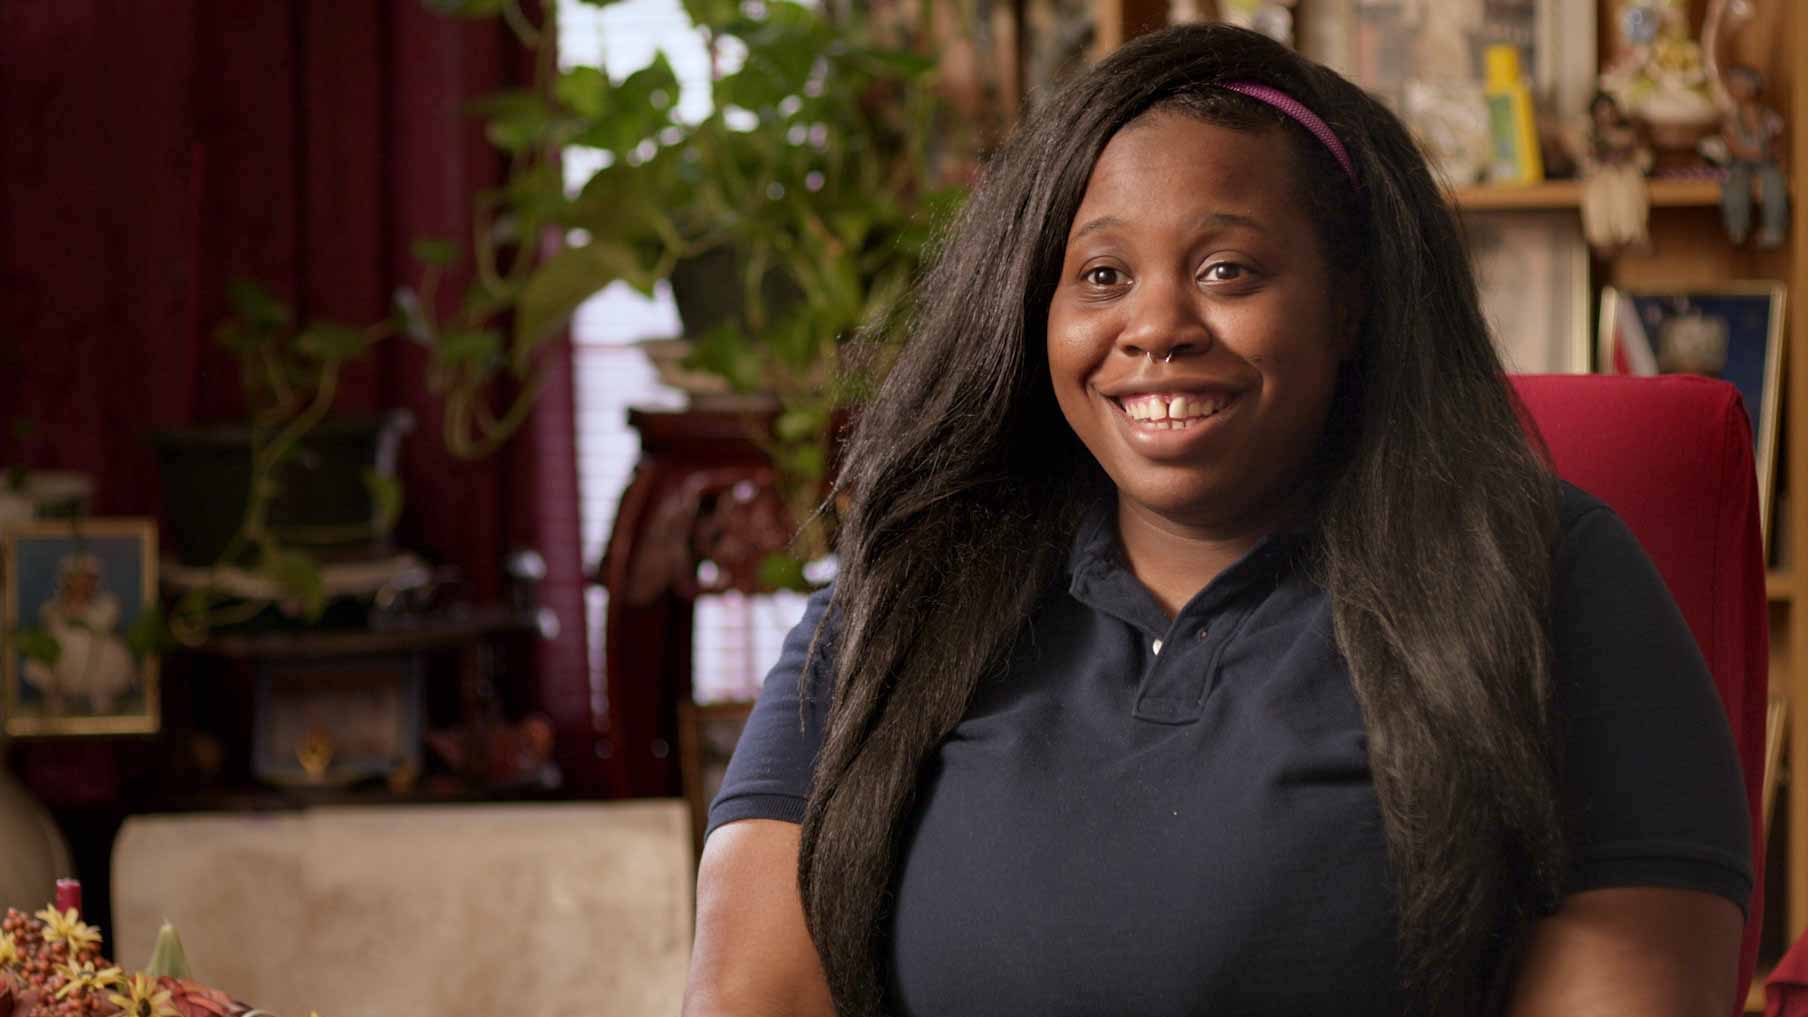 When her gas tank and her bank account were empty, Shaquitta used Even to fill up and get to work—then start budgeting better.